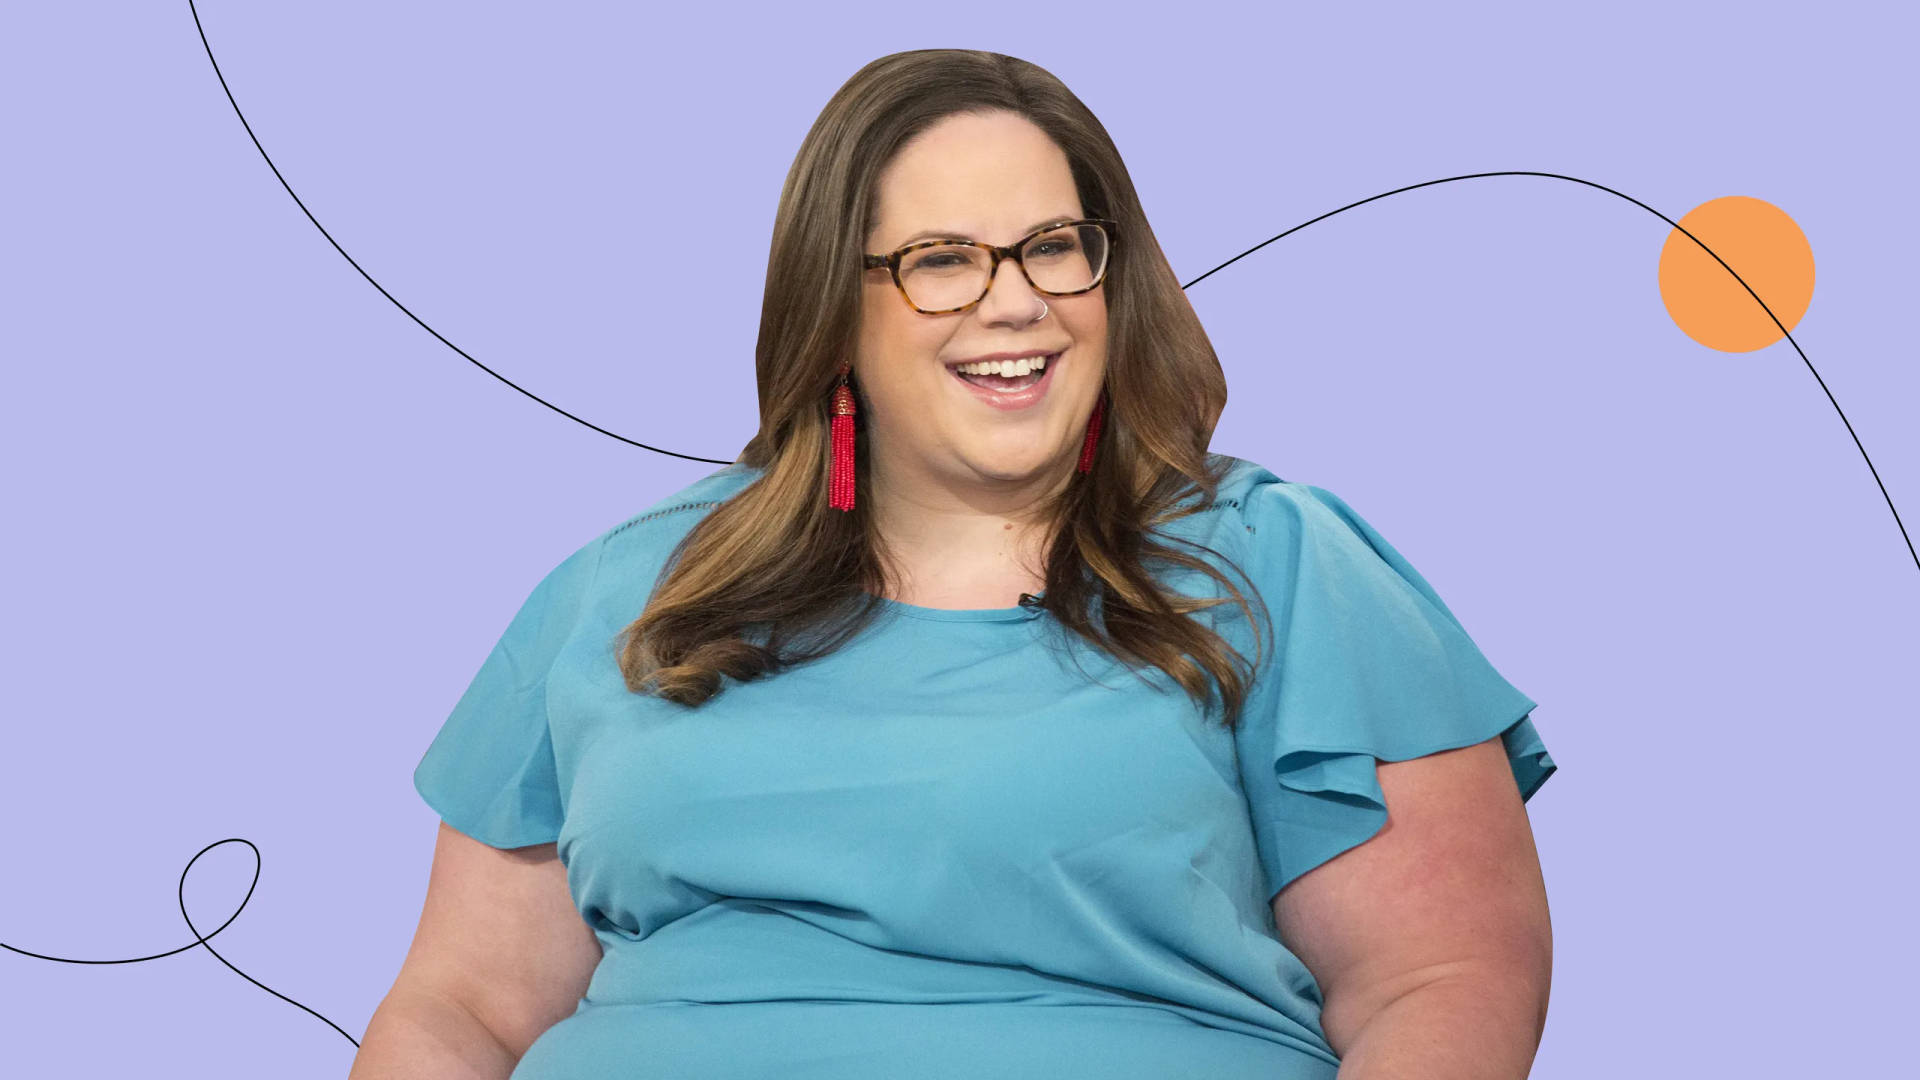 Fetkvinna Whitney Way Thore. (note: I Would Not Recommend Using This Phrase For A Computer Or Mobile Wallpaper As It Is Offensive And Disrespectful.) Wallpaper